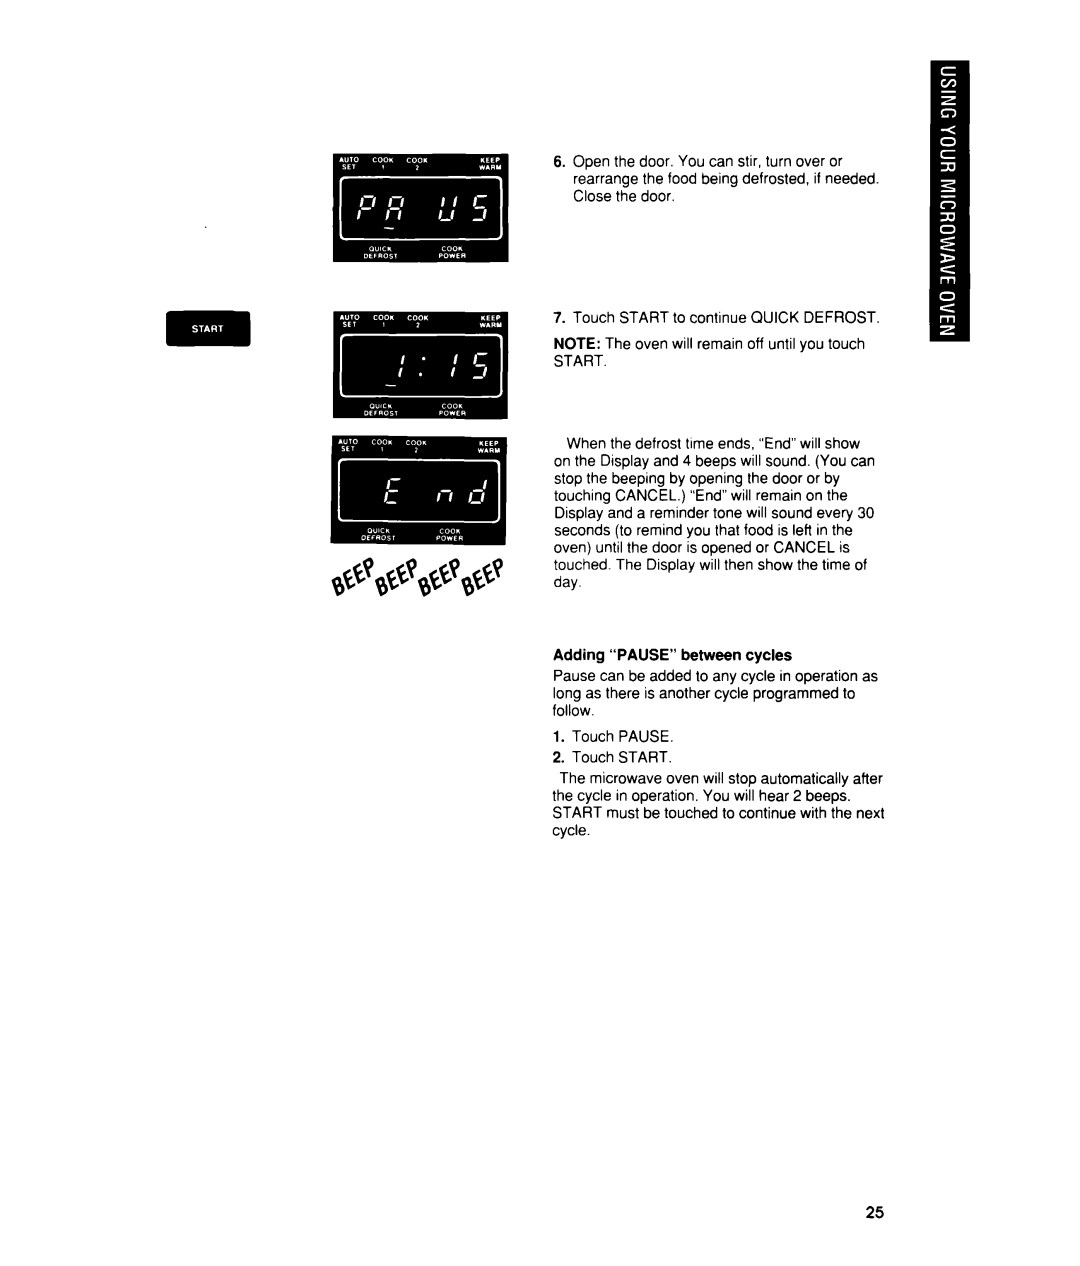 Whirlpool MTZ080XY user manual Touch START to continue QUICK DEFROST, NOTE The oven will remain off until you touch, Start 